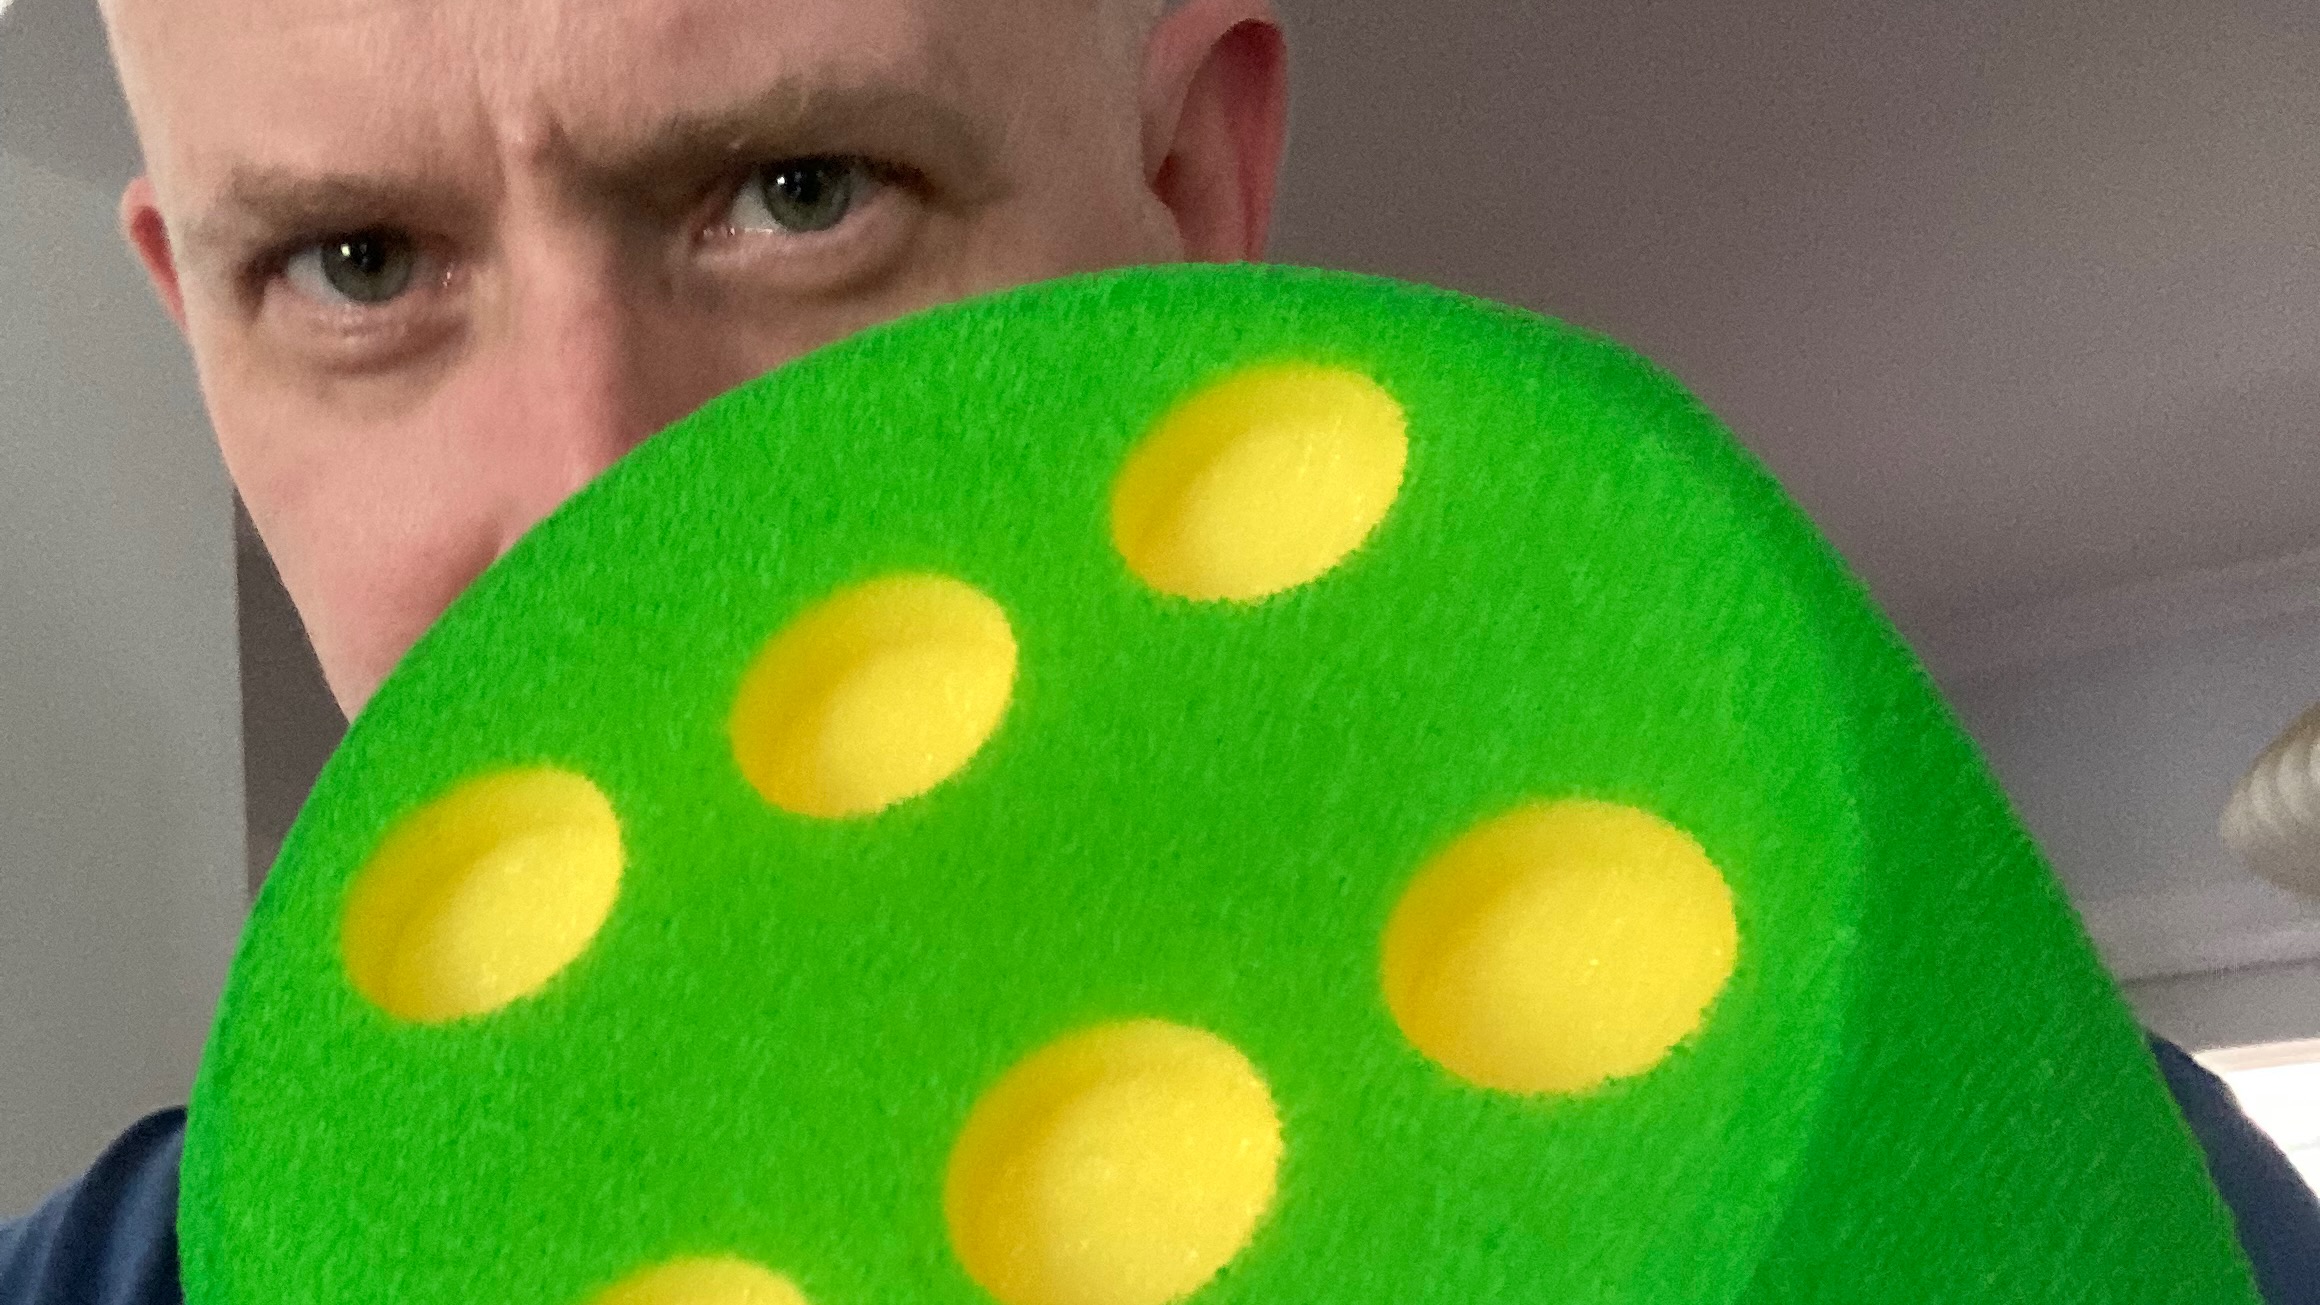 A close portrait of a very large green foam die, the six face pointed at the camera, and the mysterious eyes of its holder staring from the background.